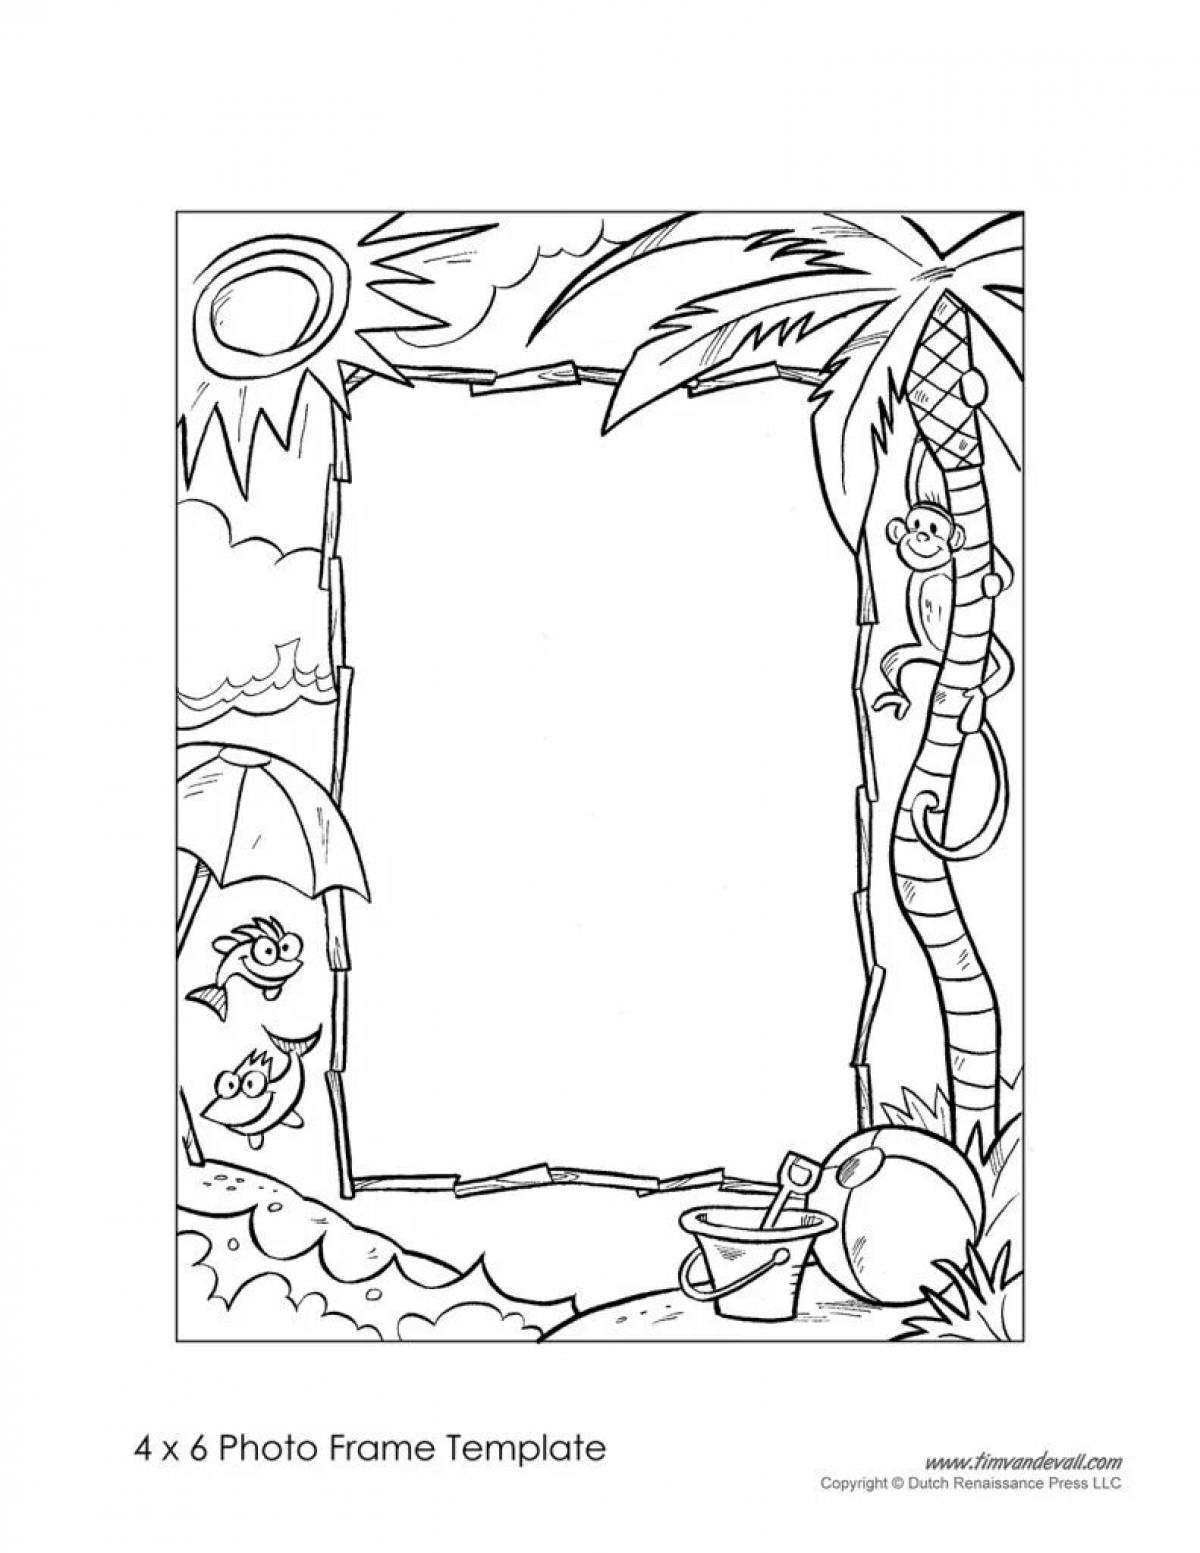 Coloring book stylish photo frame